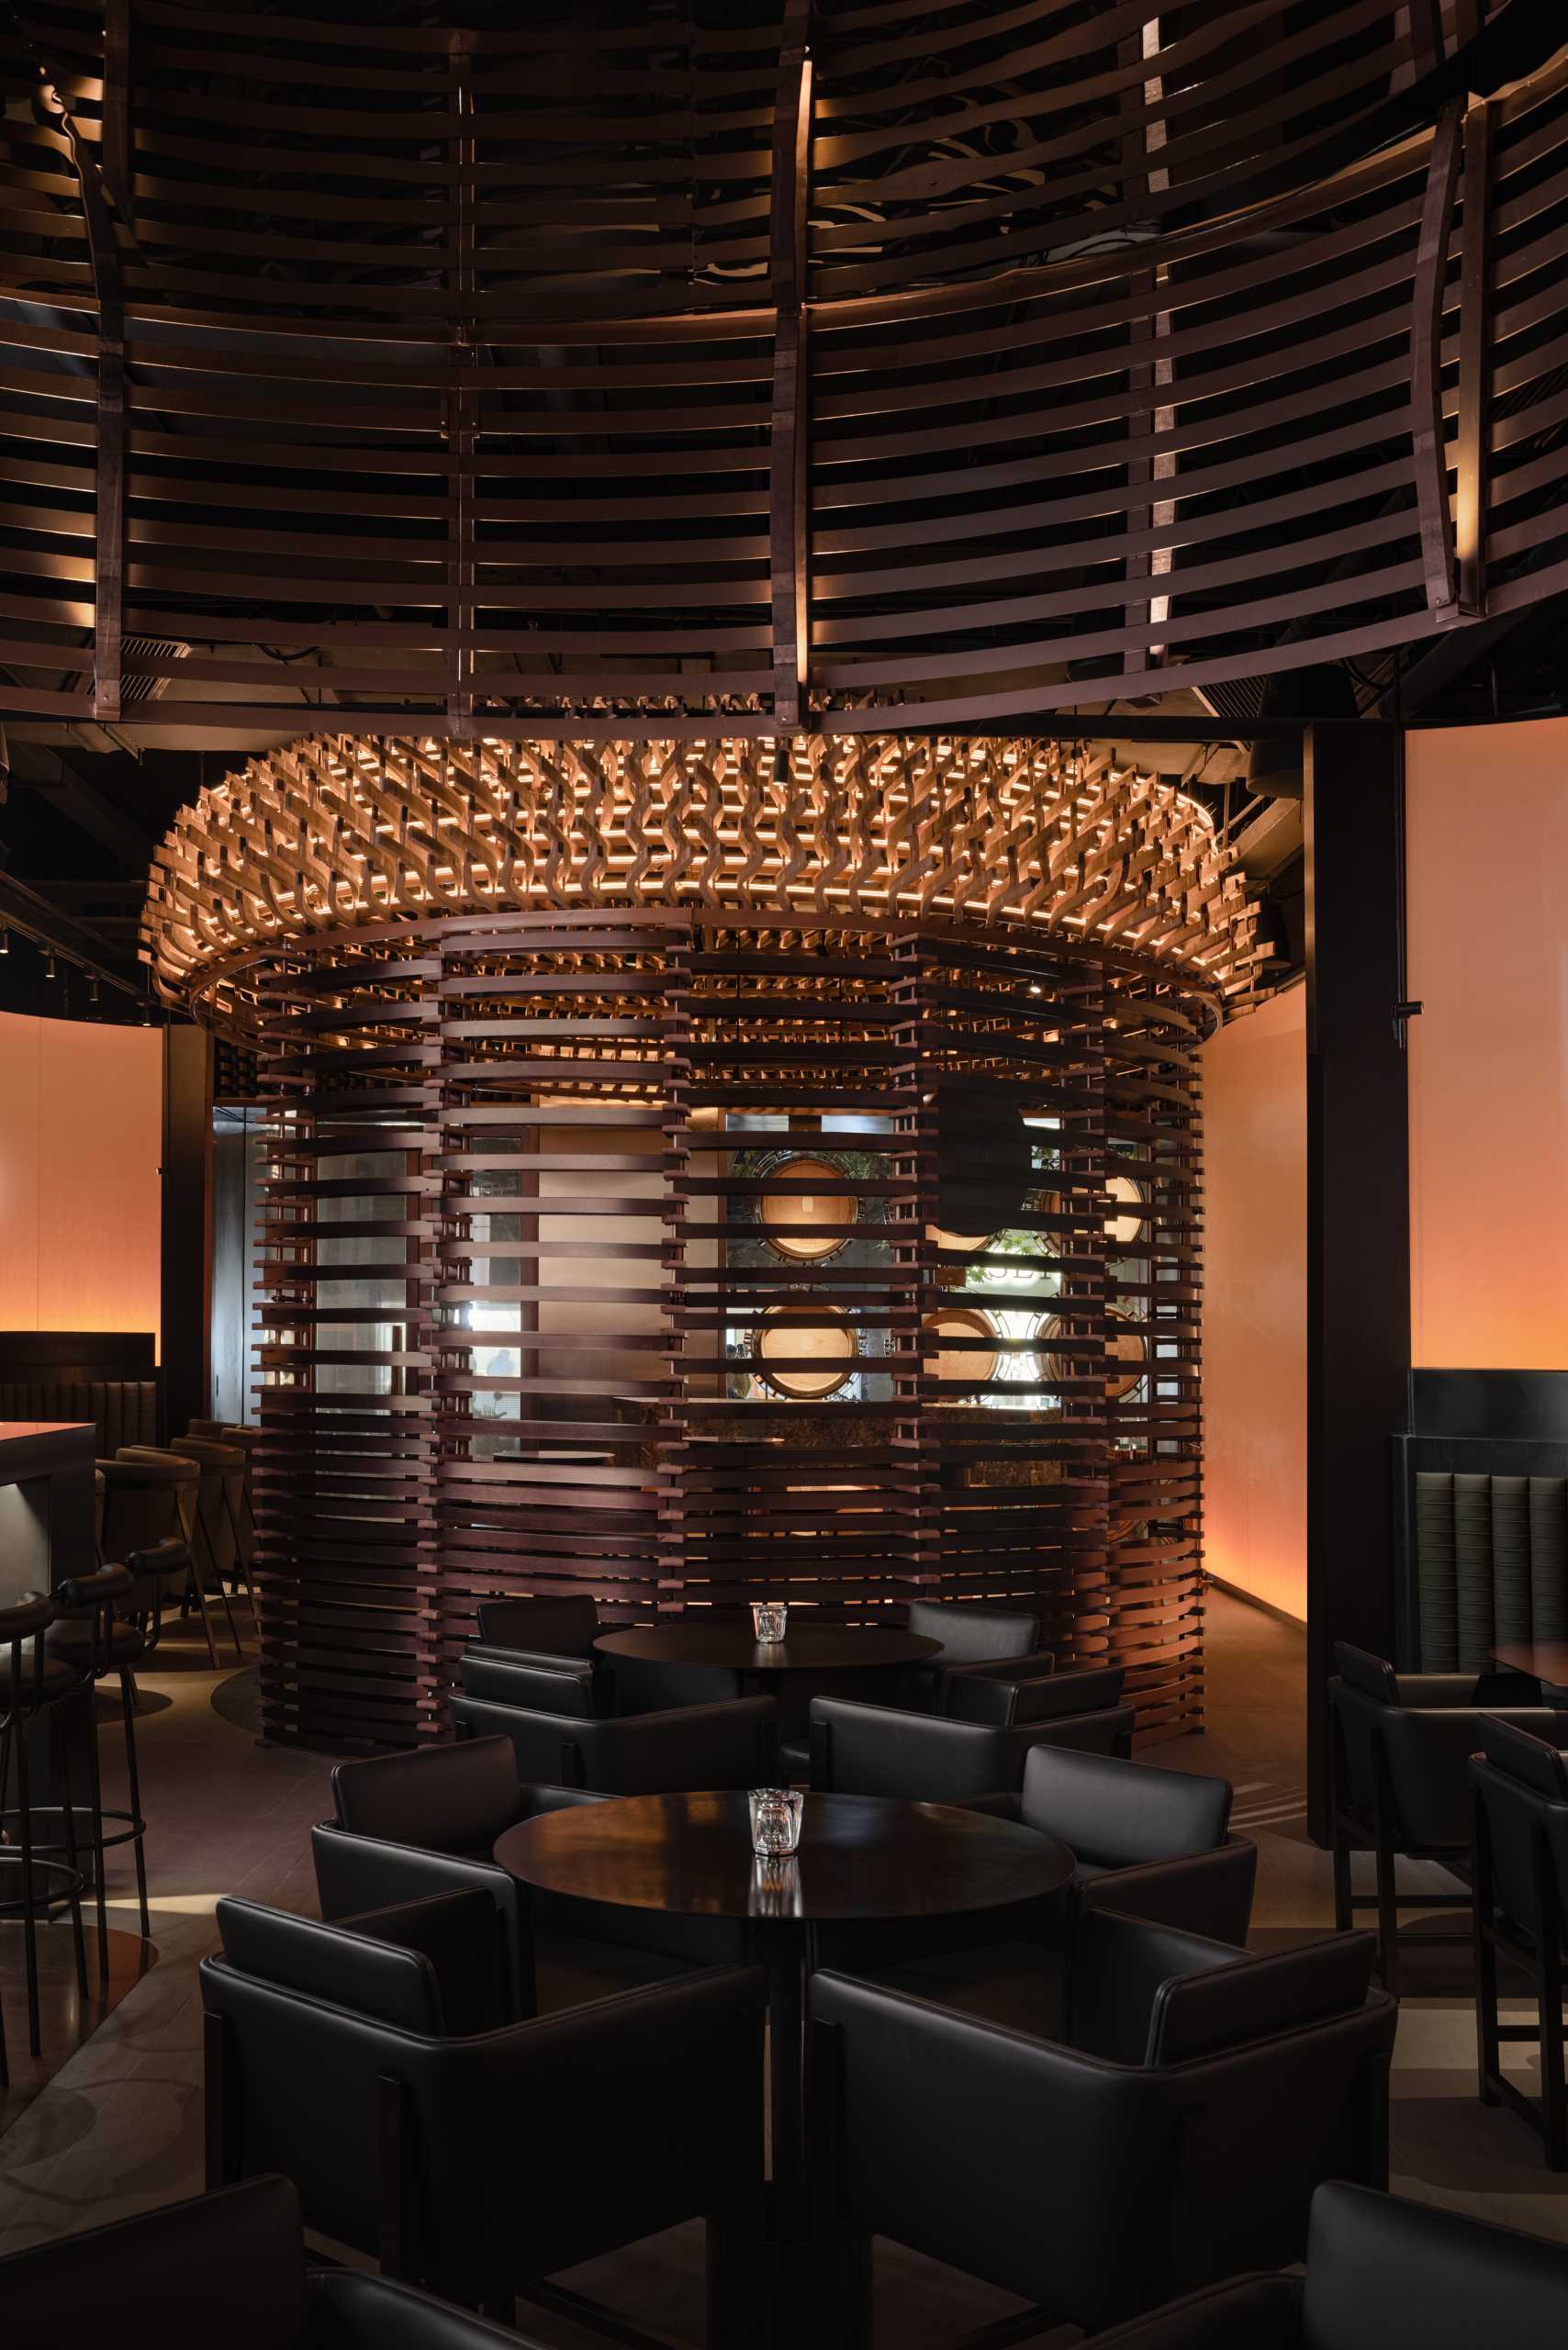 6000 pieces of discarded wooden whiskey barrels were recycled to make this modern bar.